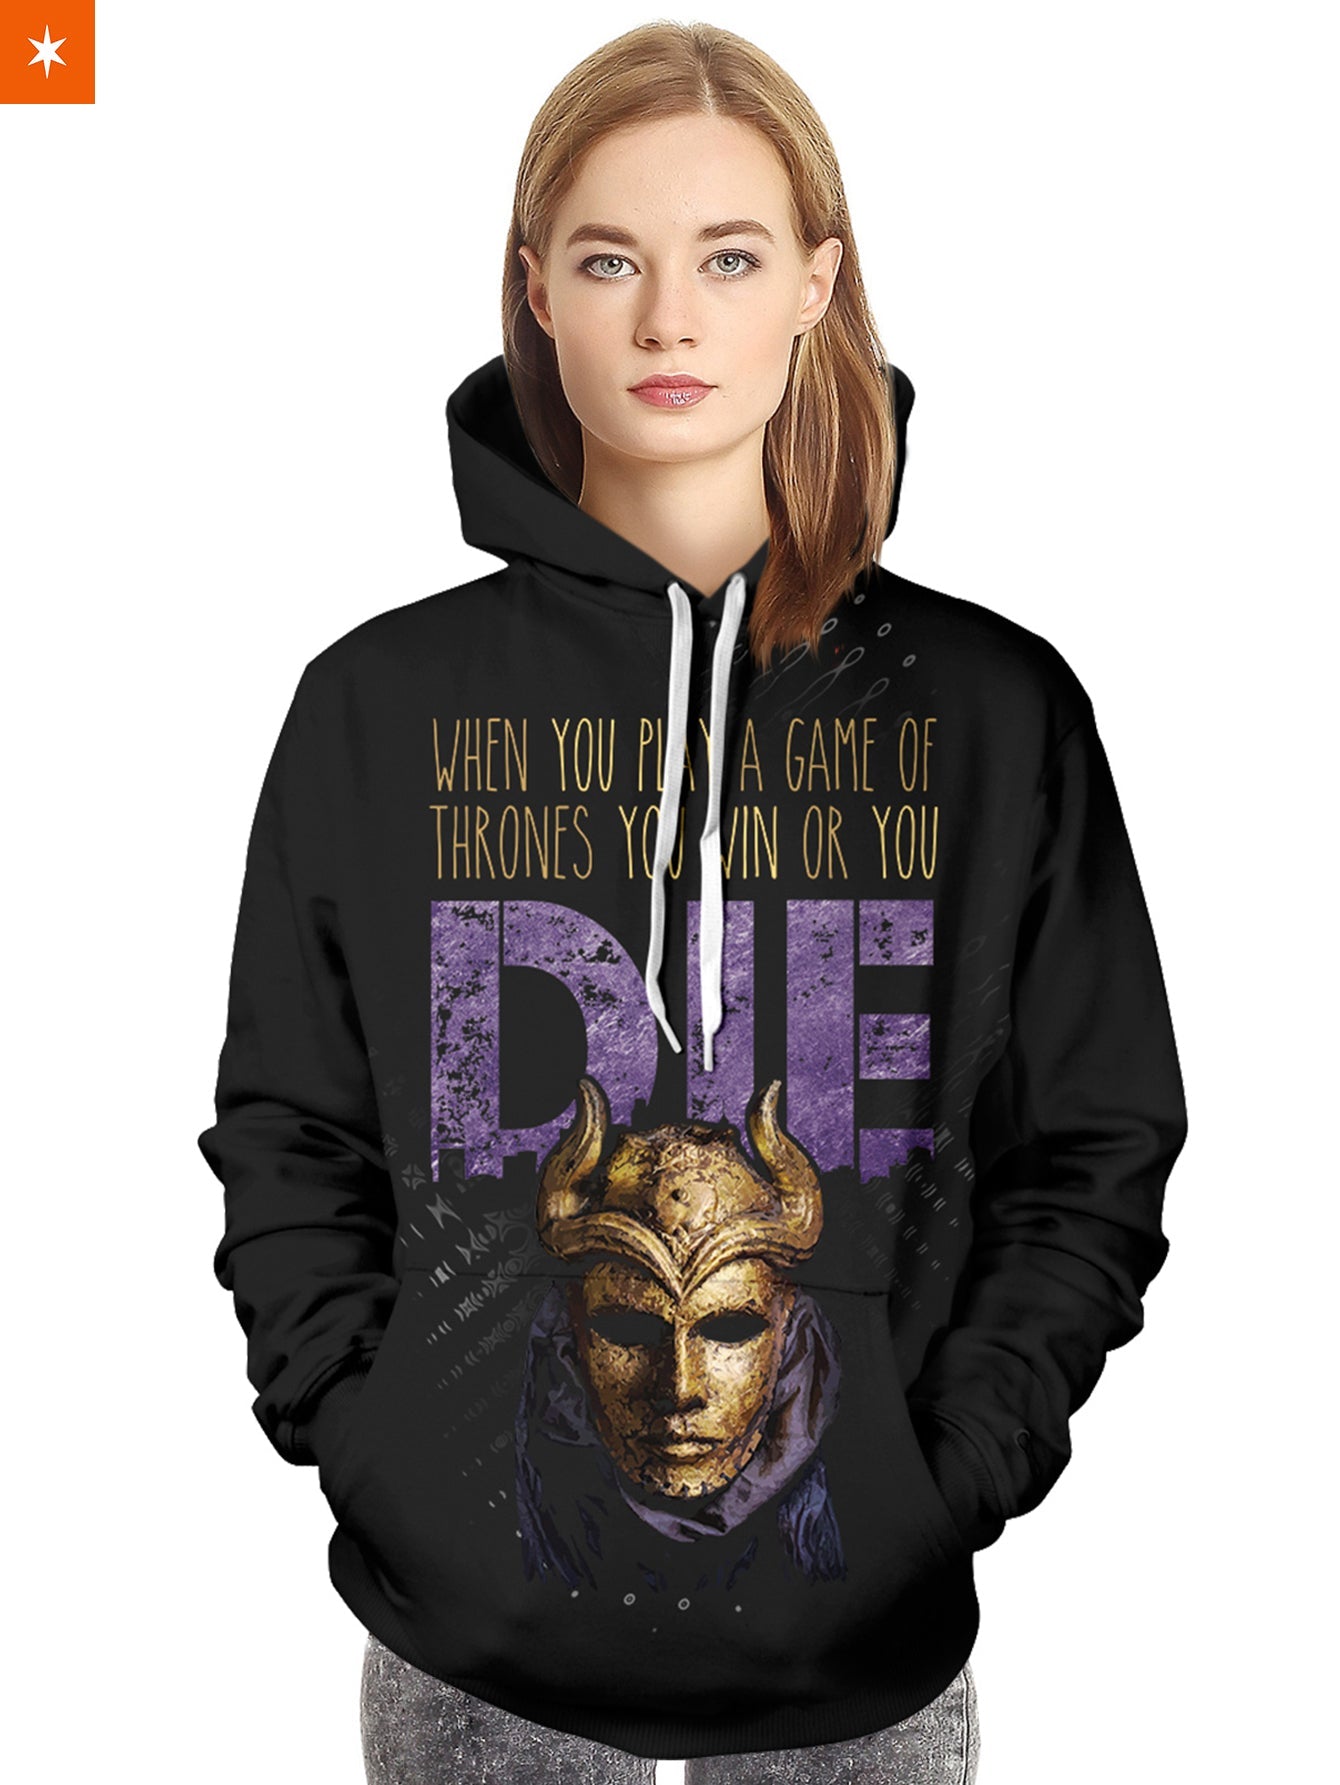 Fandomaniax - When you play a Game of Thrones you Win or you Die Unisex Pullover Hoodie